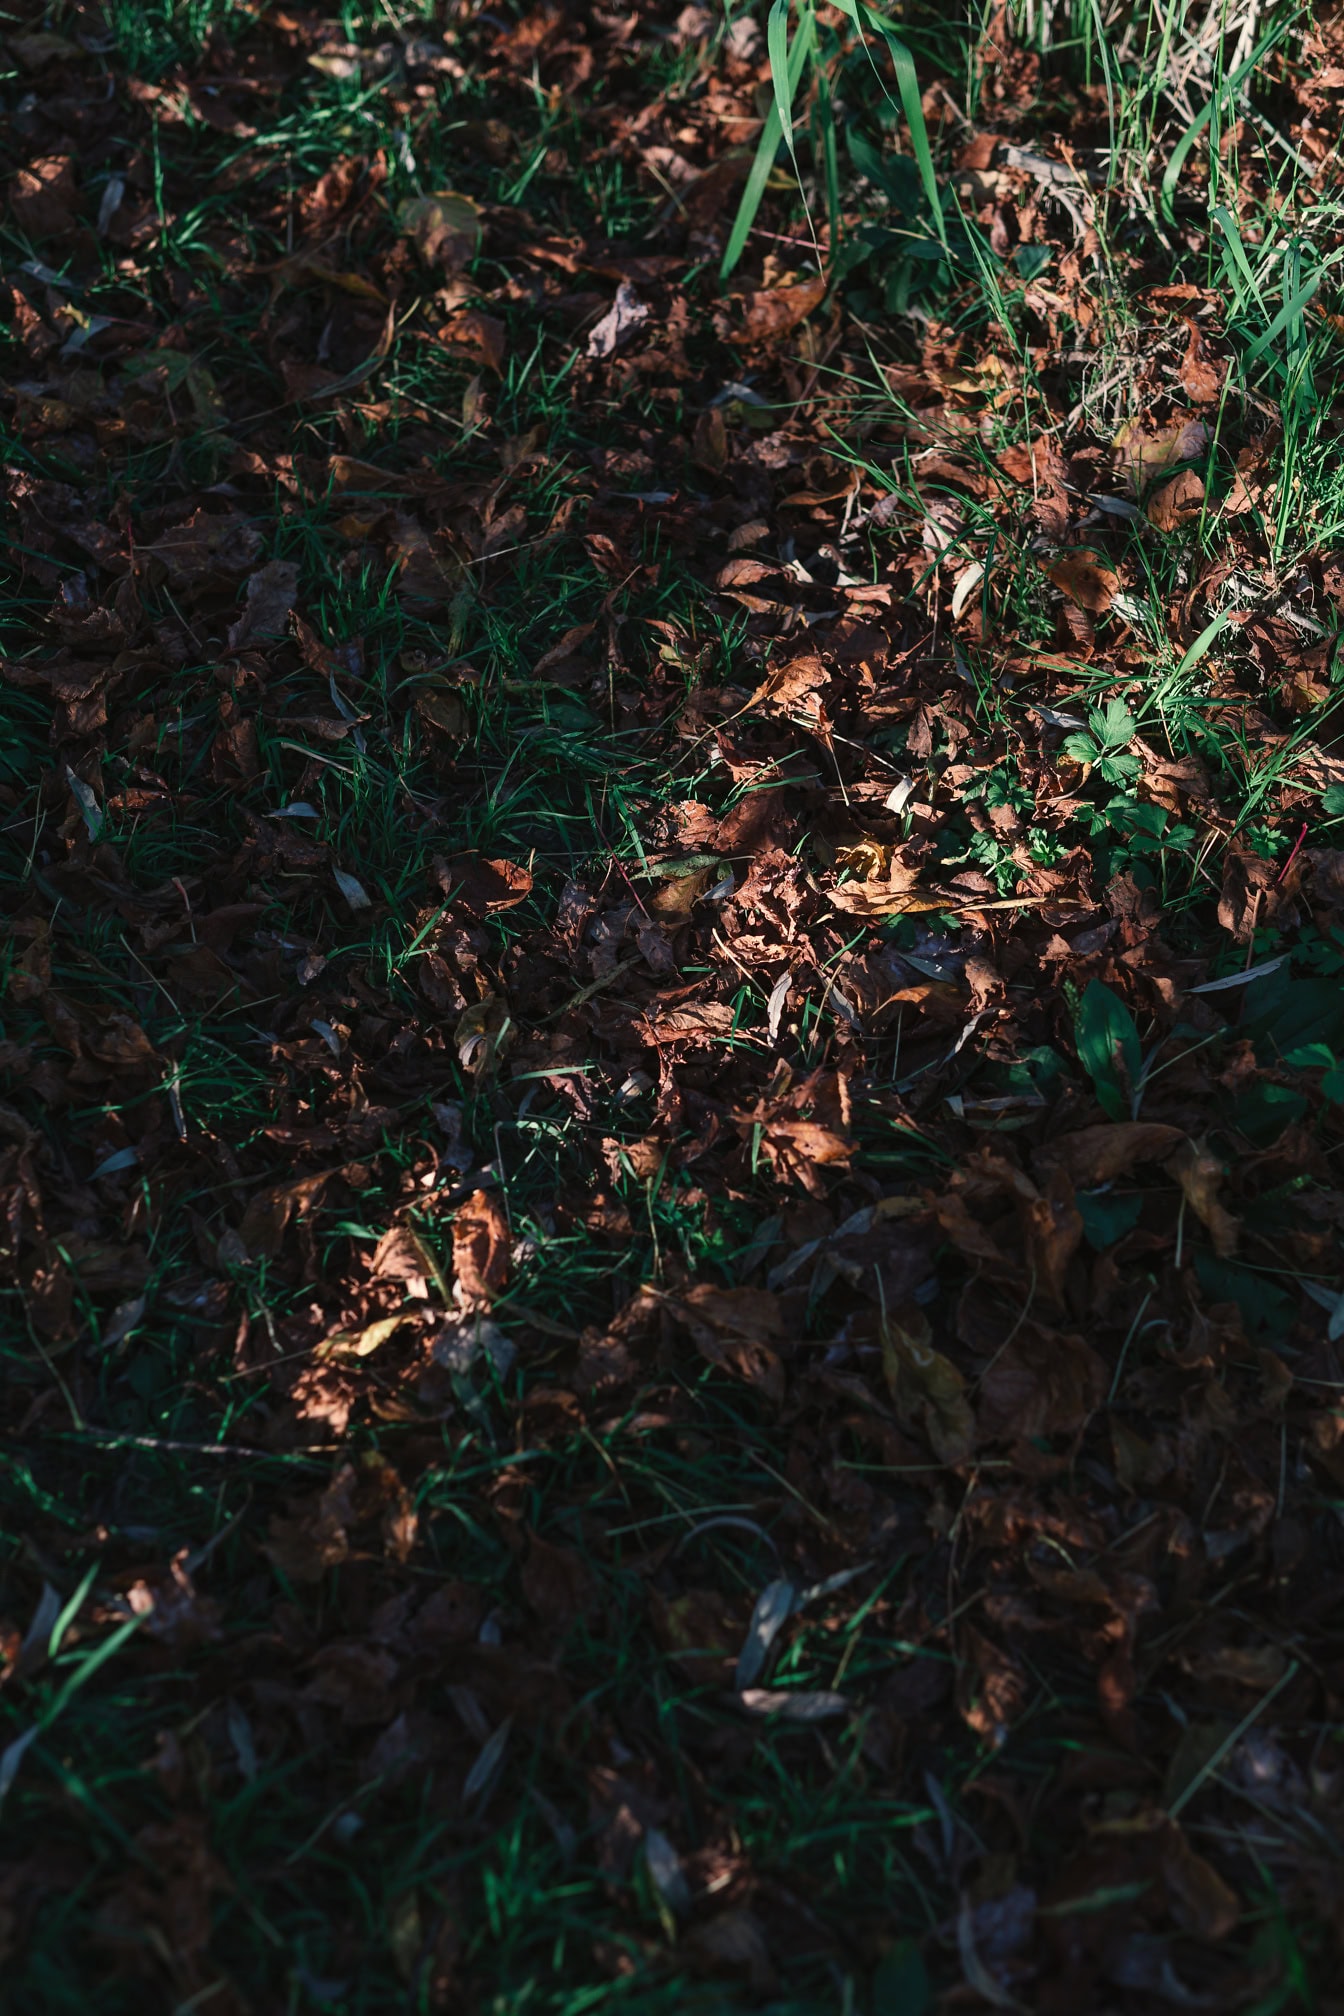 Dry brown leaves on the ground among green grass